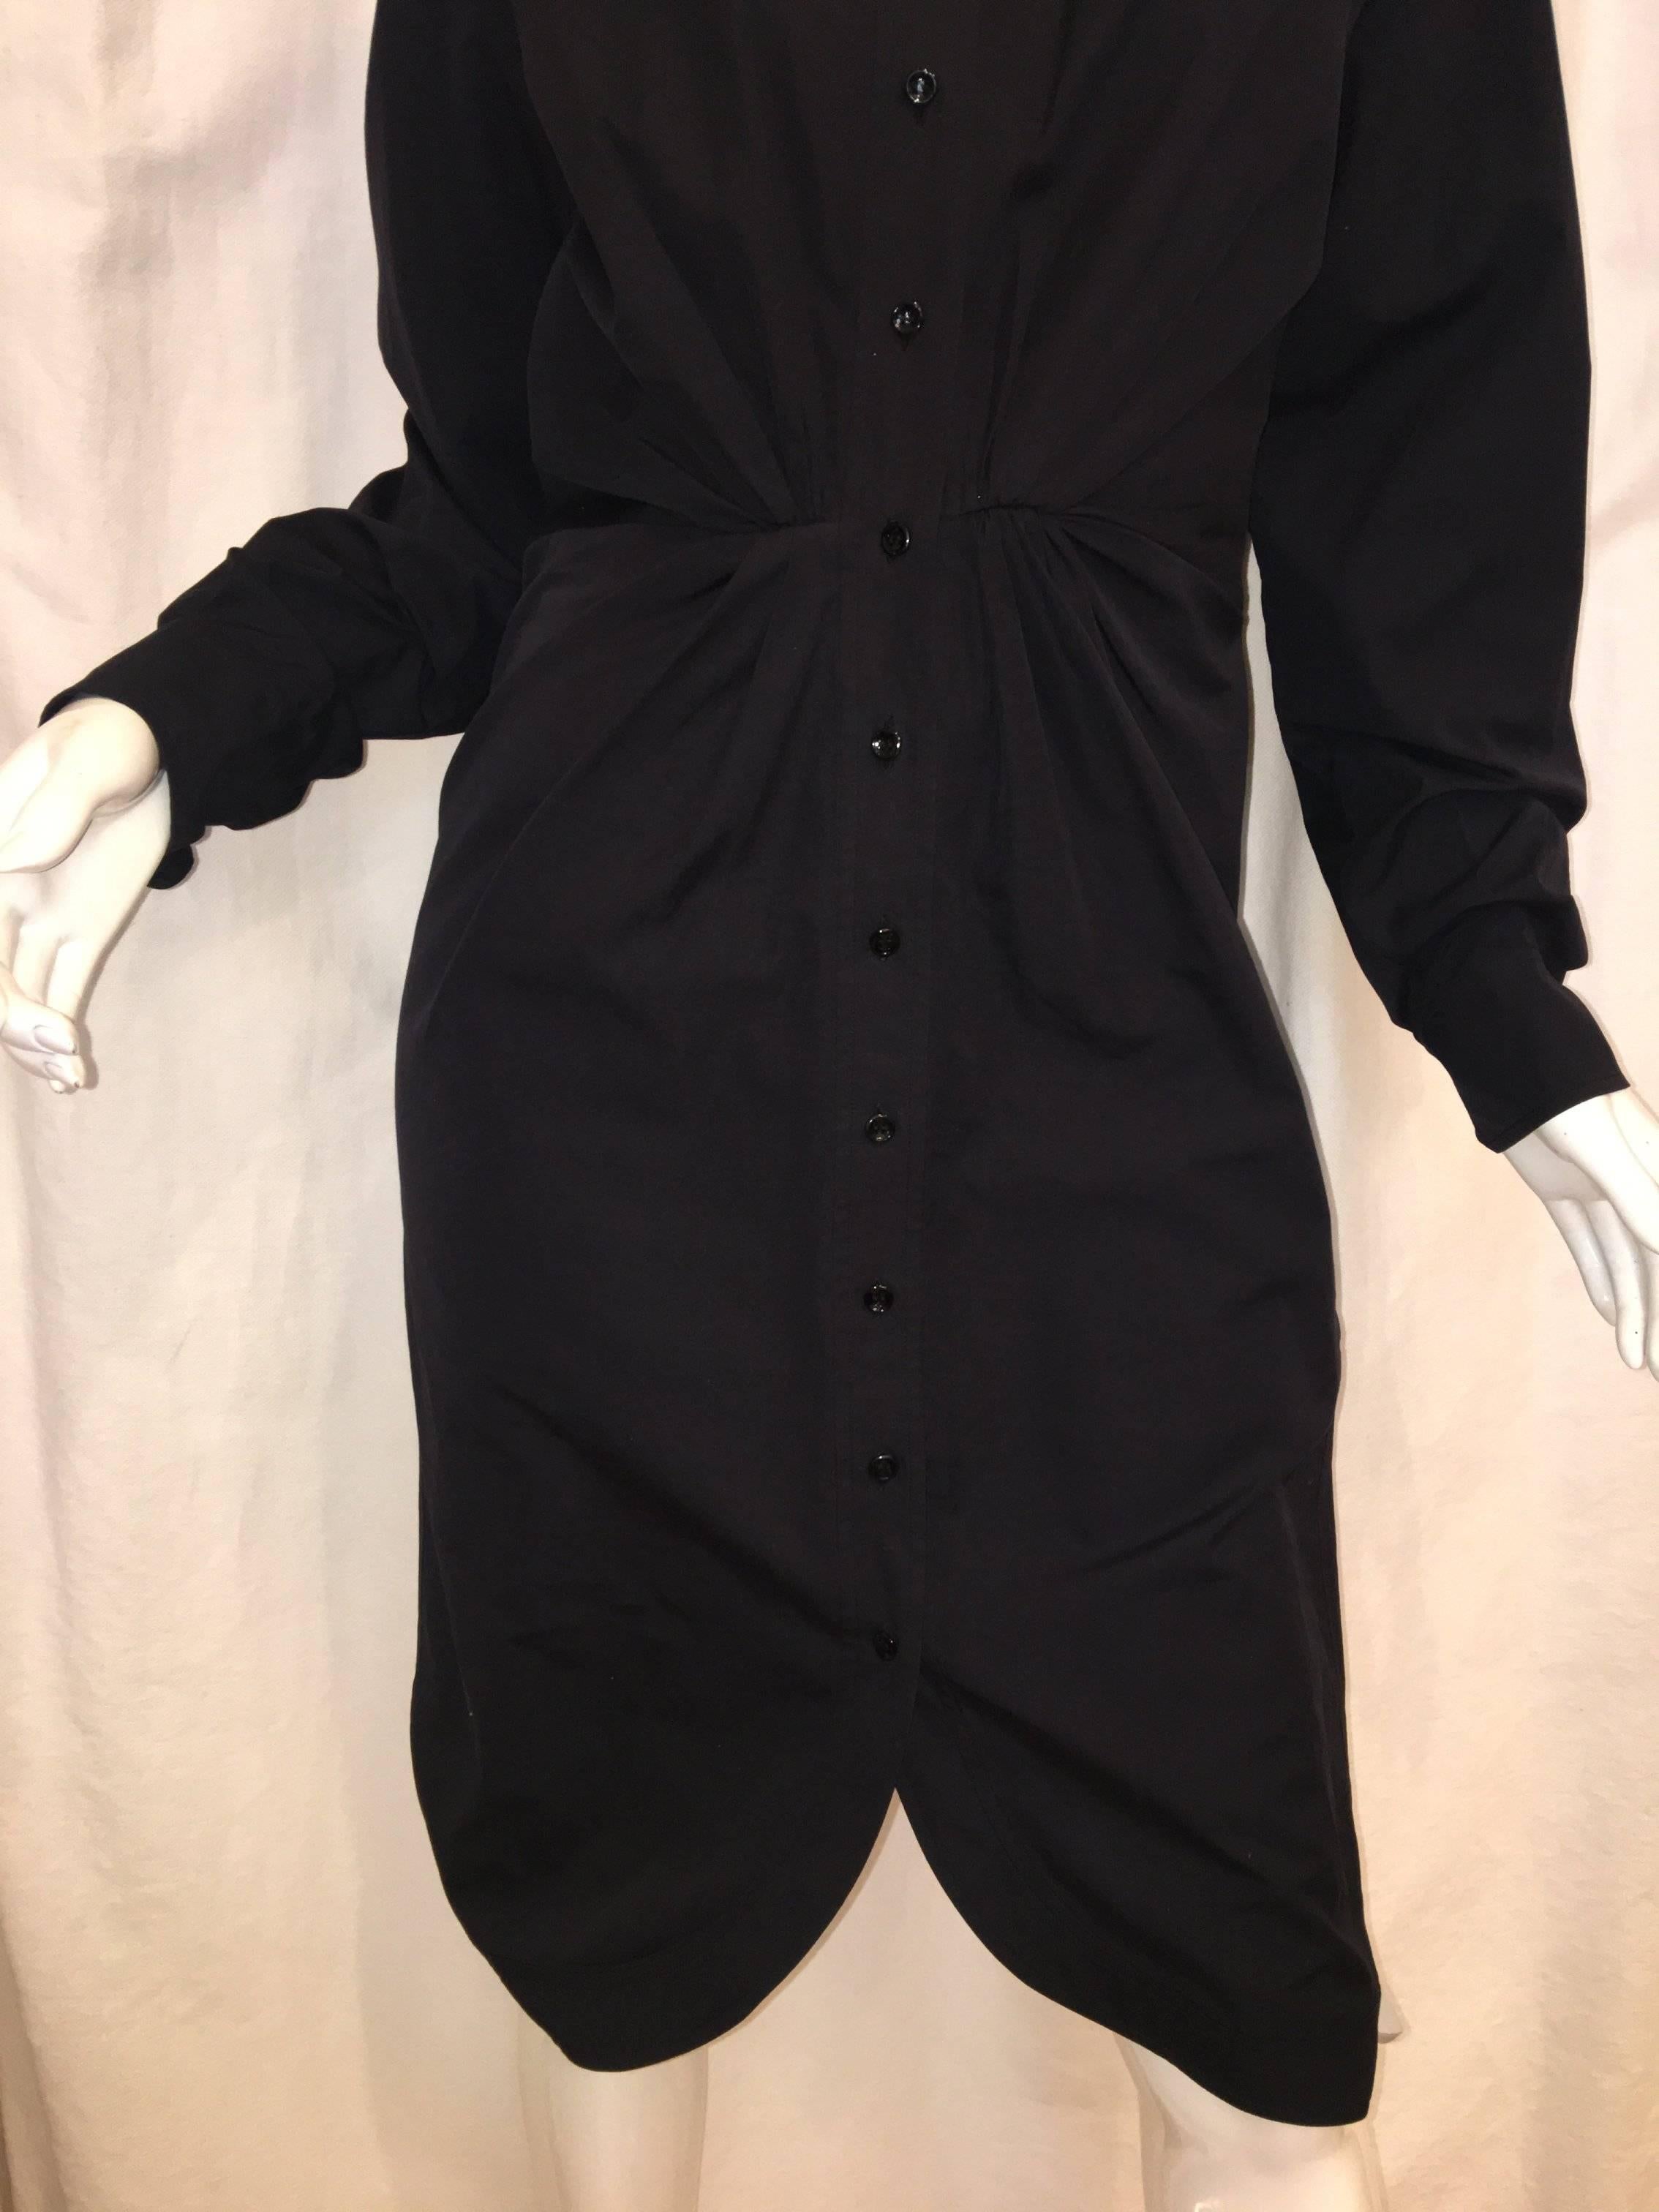 Yves Saint Laurent Button Down Dress with Cinched/ Pleated Front and Long Sleeves. 